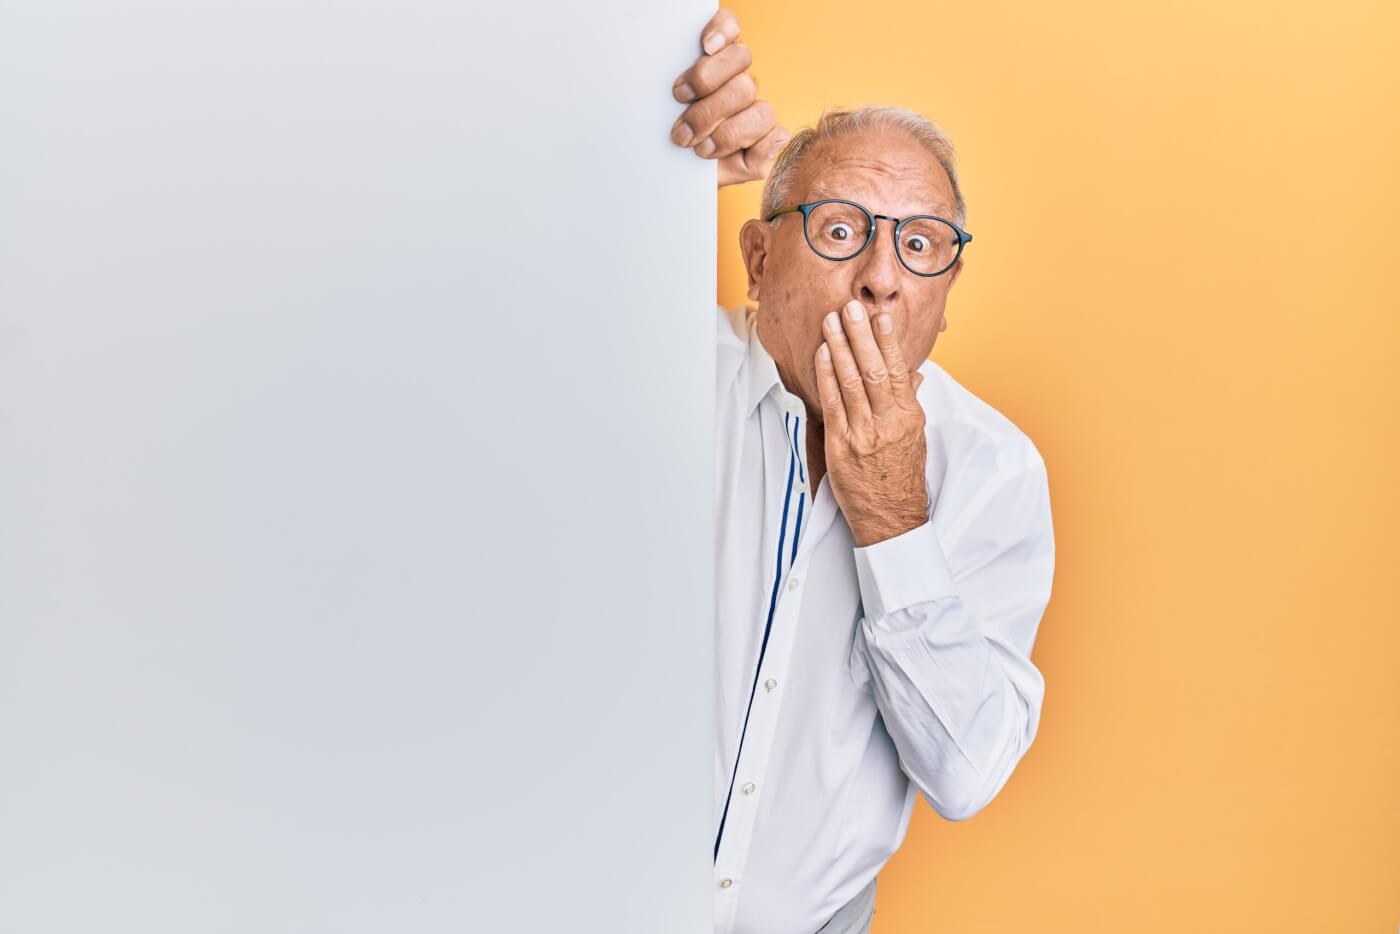 man with grey hair and glasses has hand over mouth